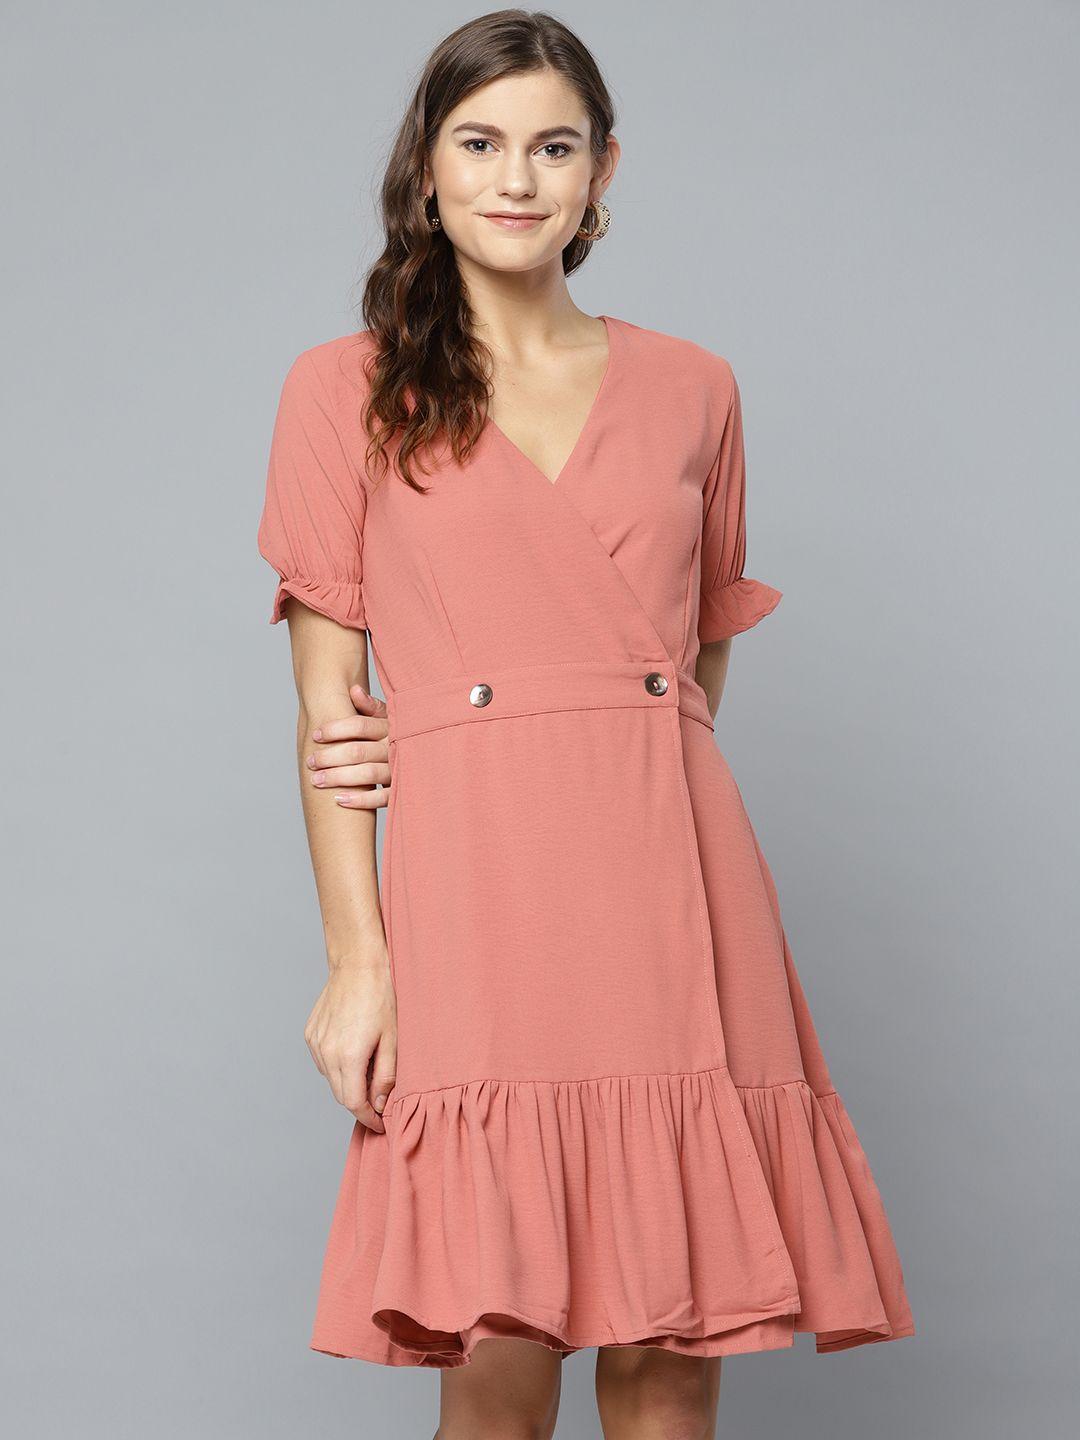 marie claire women dusty pink solid wrap dress